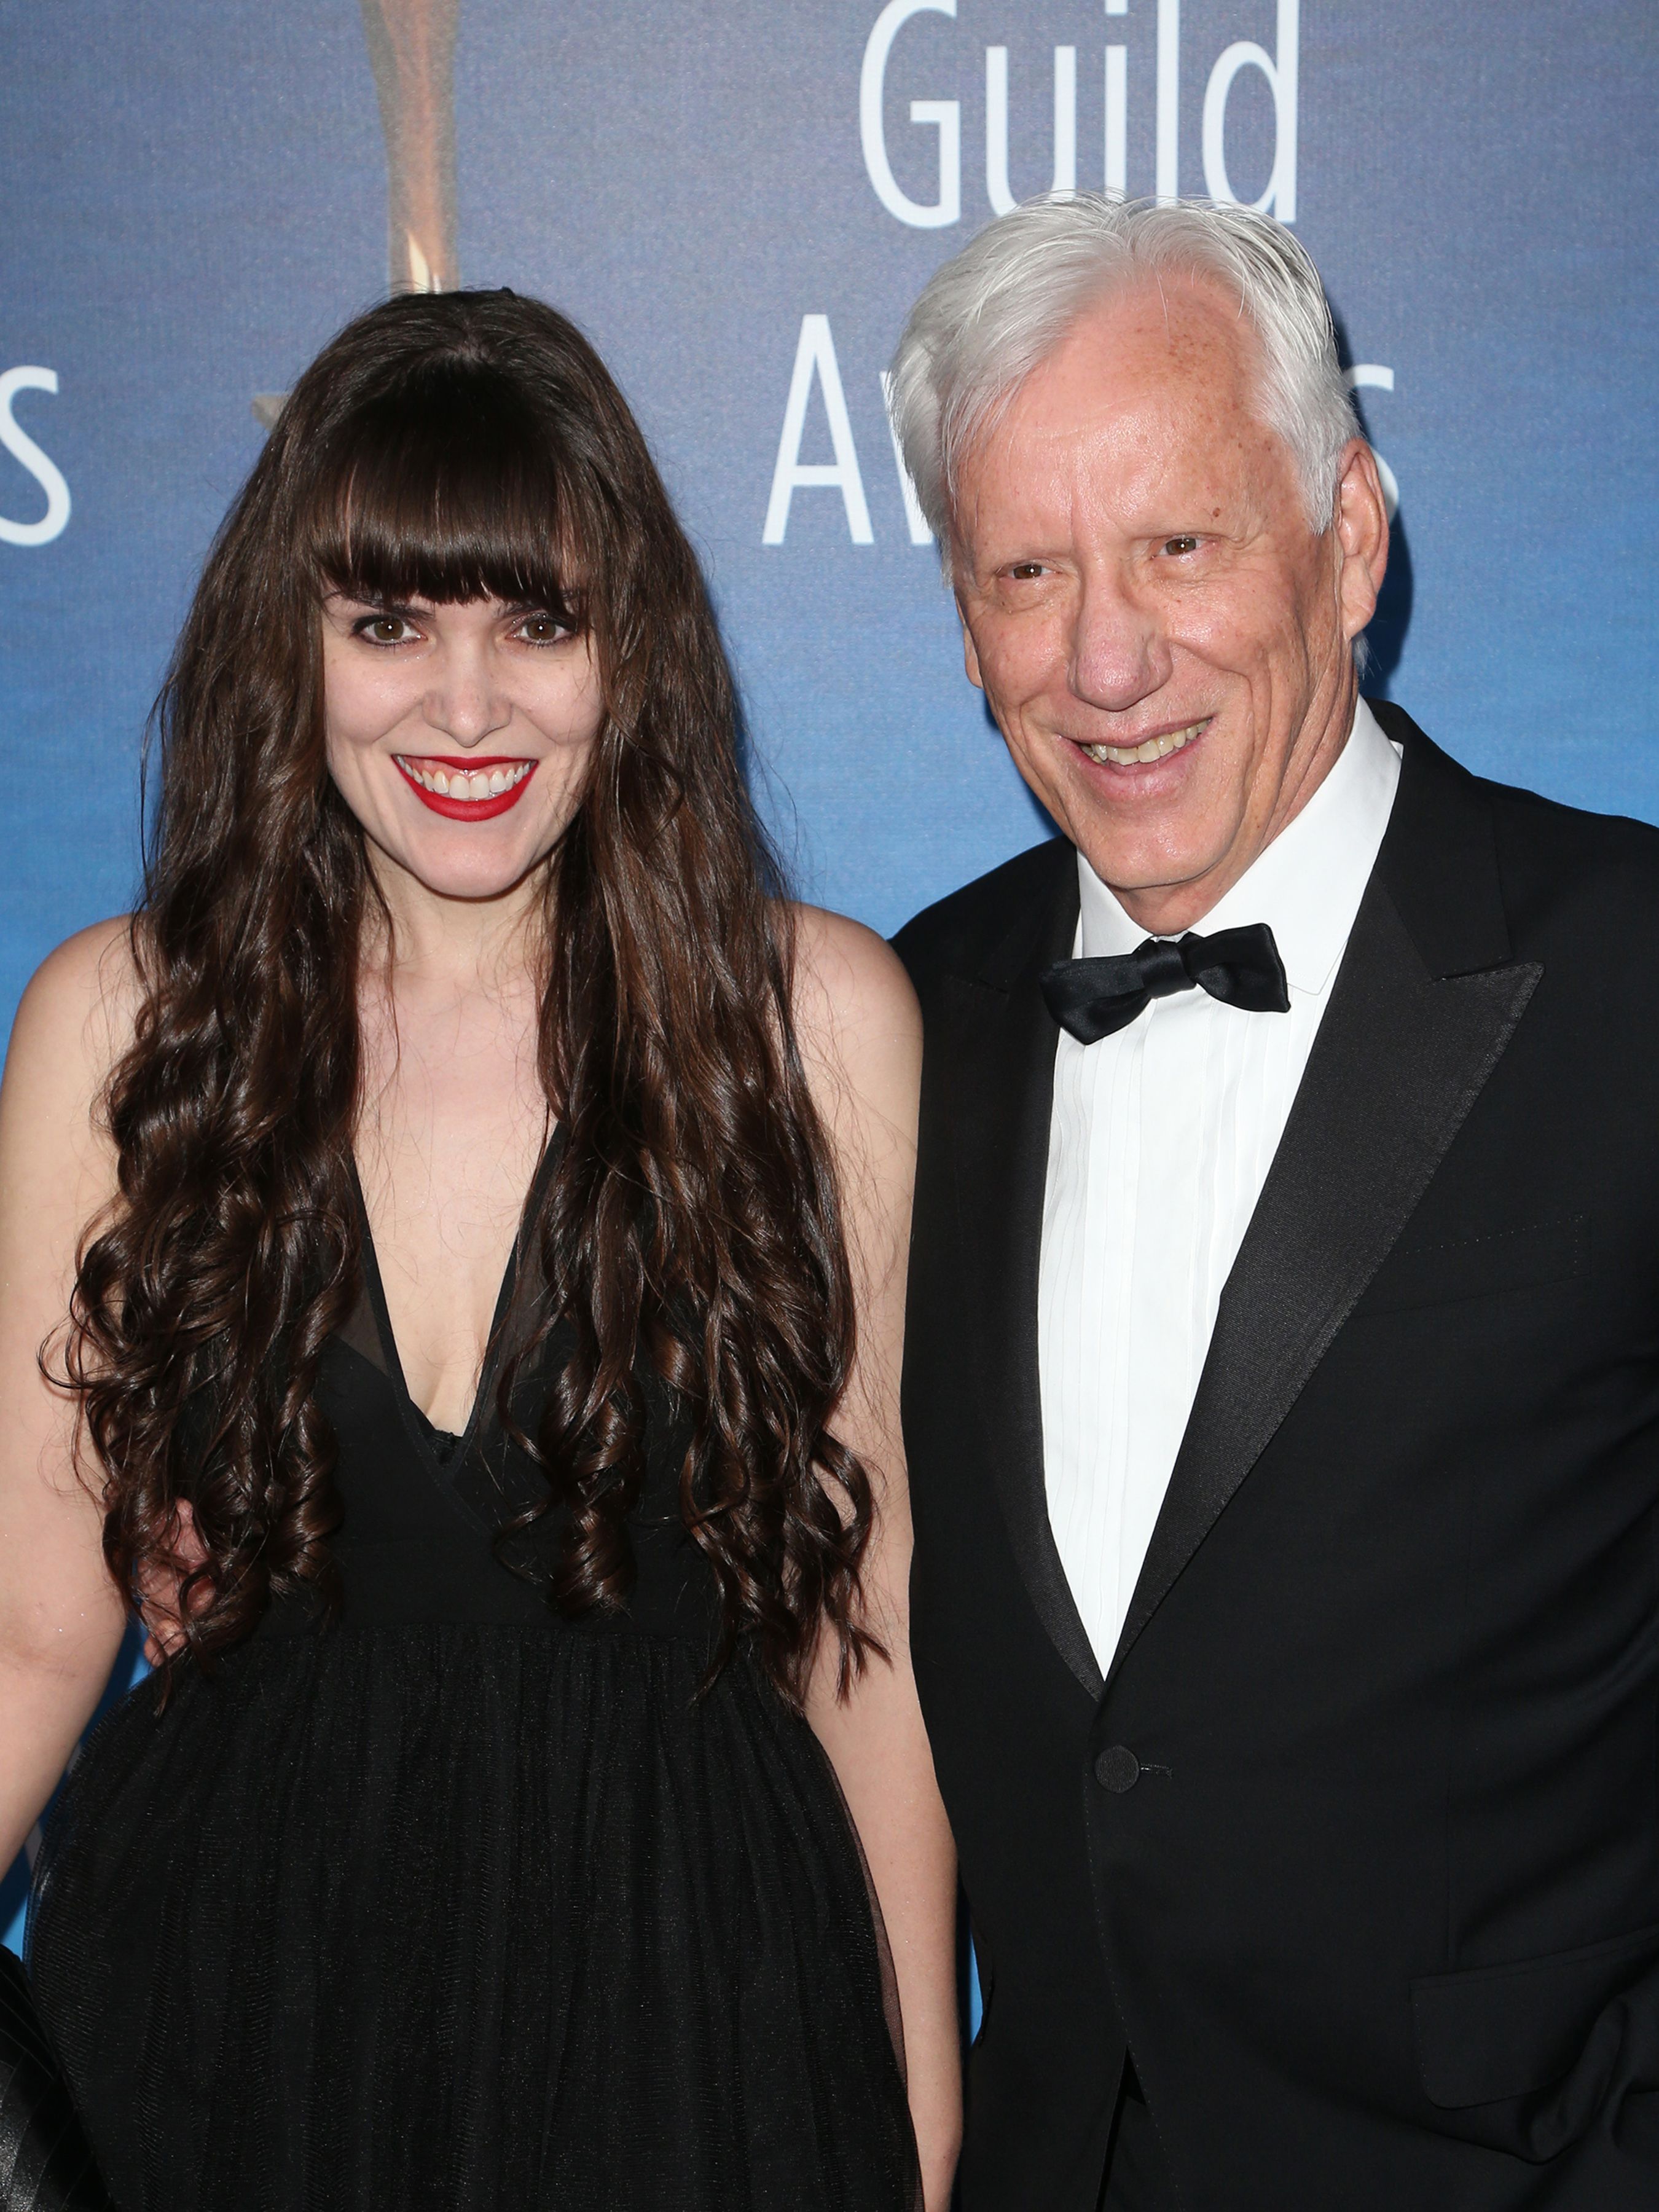 <p>Actor James Woods -- who's 42 years older than love Sara Miller, according to <a href="https://pagesix.com/2021/05/25/james-woods-74-appears-to-be-engaged-to-32-year-old-girlfriend/">Page Six</a> -- sparked speculation that <a href="https://www.wonderwall.com/celebrity/couples/kanye-west-dating-bradley-cooper-ex-irina-shayk-rumors-more-celeb-love-news-may-2021-romance-report-459999.gallery?photoId=460277">they're engaged</a> after Sara was photographed wearing a sizable diamond solitaire ring during a May 2021 lunch outing with the Oscar nominee. (See photos <a href="https://pagesix.com/2021/05/25/james-woods-74-appears-to-be-engaged-to-32-year-old-girlfriend/">here</a>.) Engagement rumors first cropped up a month earlier when the actor, who's been married twice before, shared <a href="https://www.instagram.com/p/CN28ZwHnisH/">an Instagram photo</a> of Sara wearing the same ring one day after his 74th birthday and captioned it, "Life is a blessing." </p>